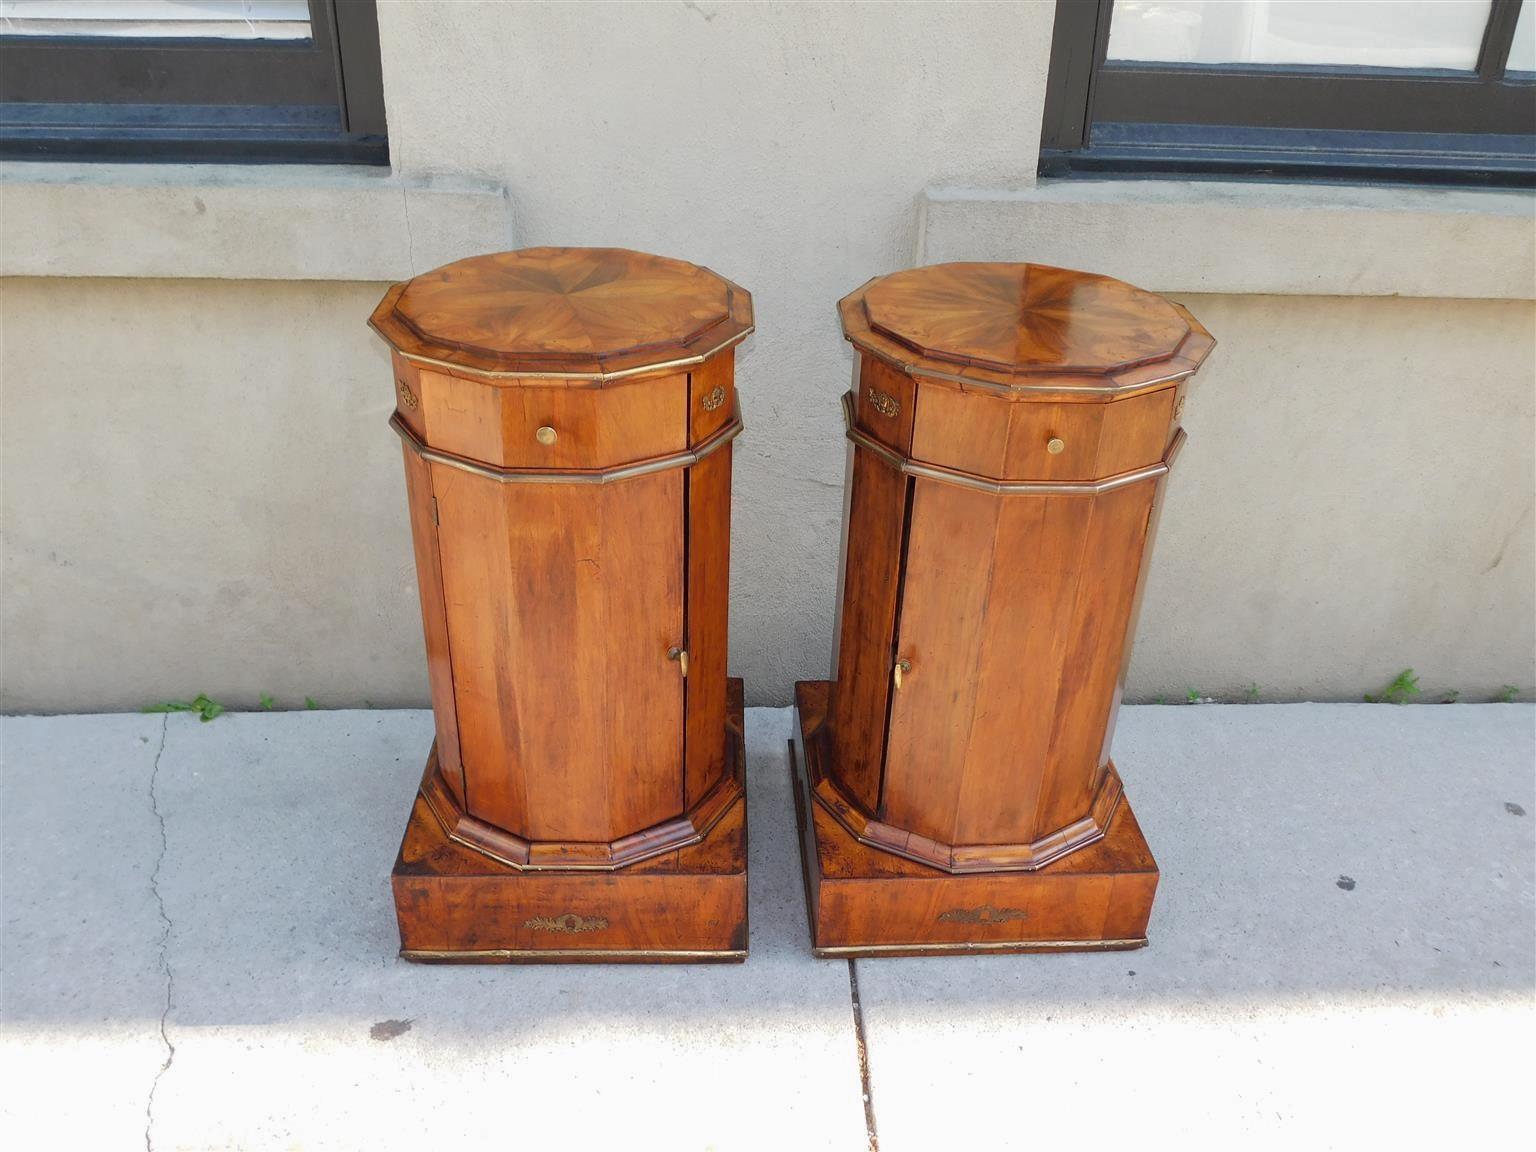 Pair of French Regency book matched mahogany foliage urn ormolu commodes with flanking brass knob single drawers, brass handle cabinets with interior shelf, and resting on squared brass trimmed bases.  Early 19th Century 